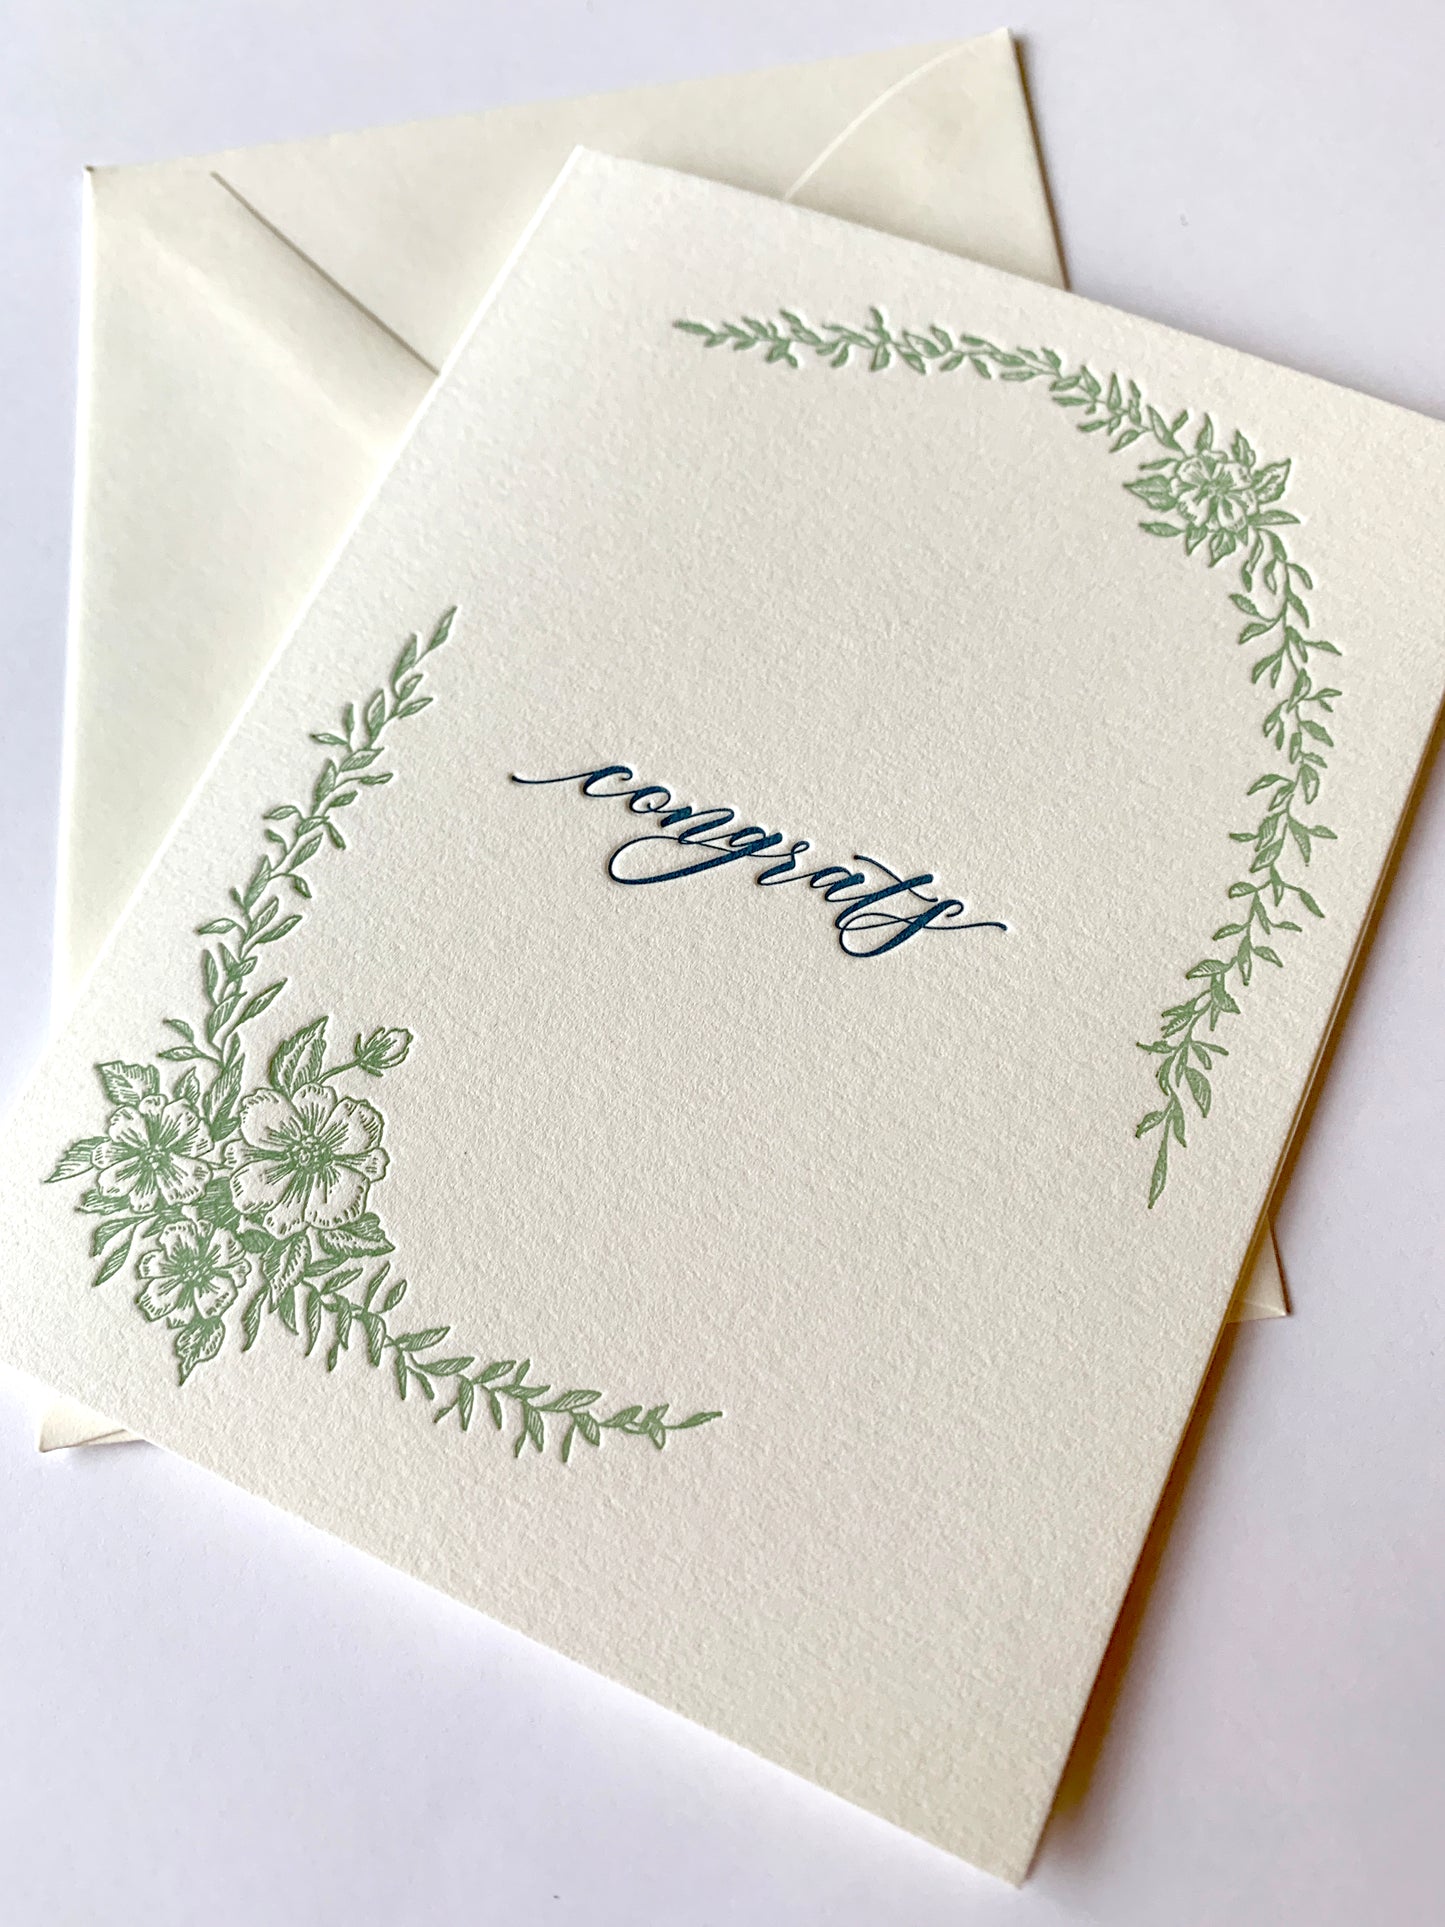 Letterpress congrats card with greenery that says "Congrats" in the middle by Rust Belt Love